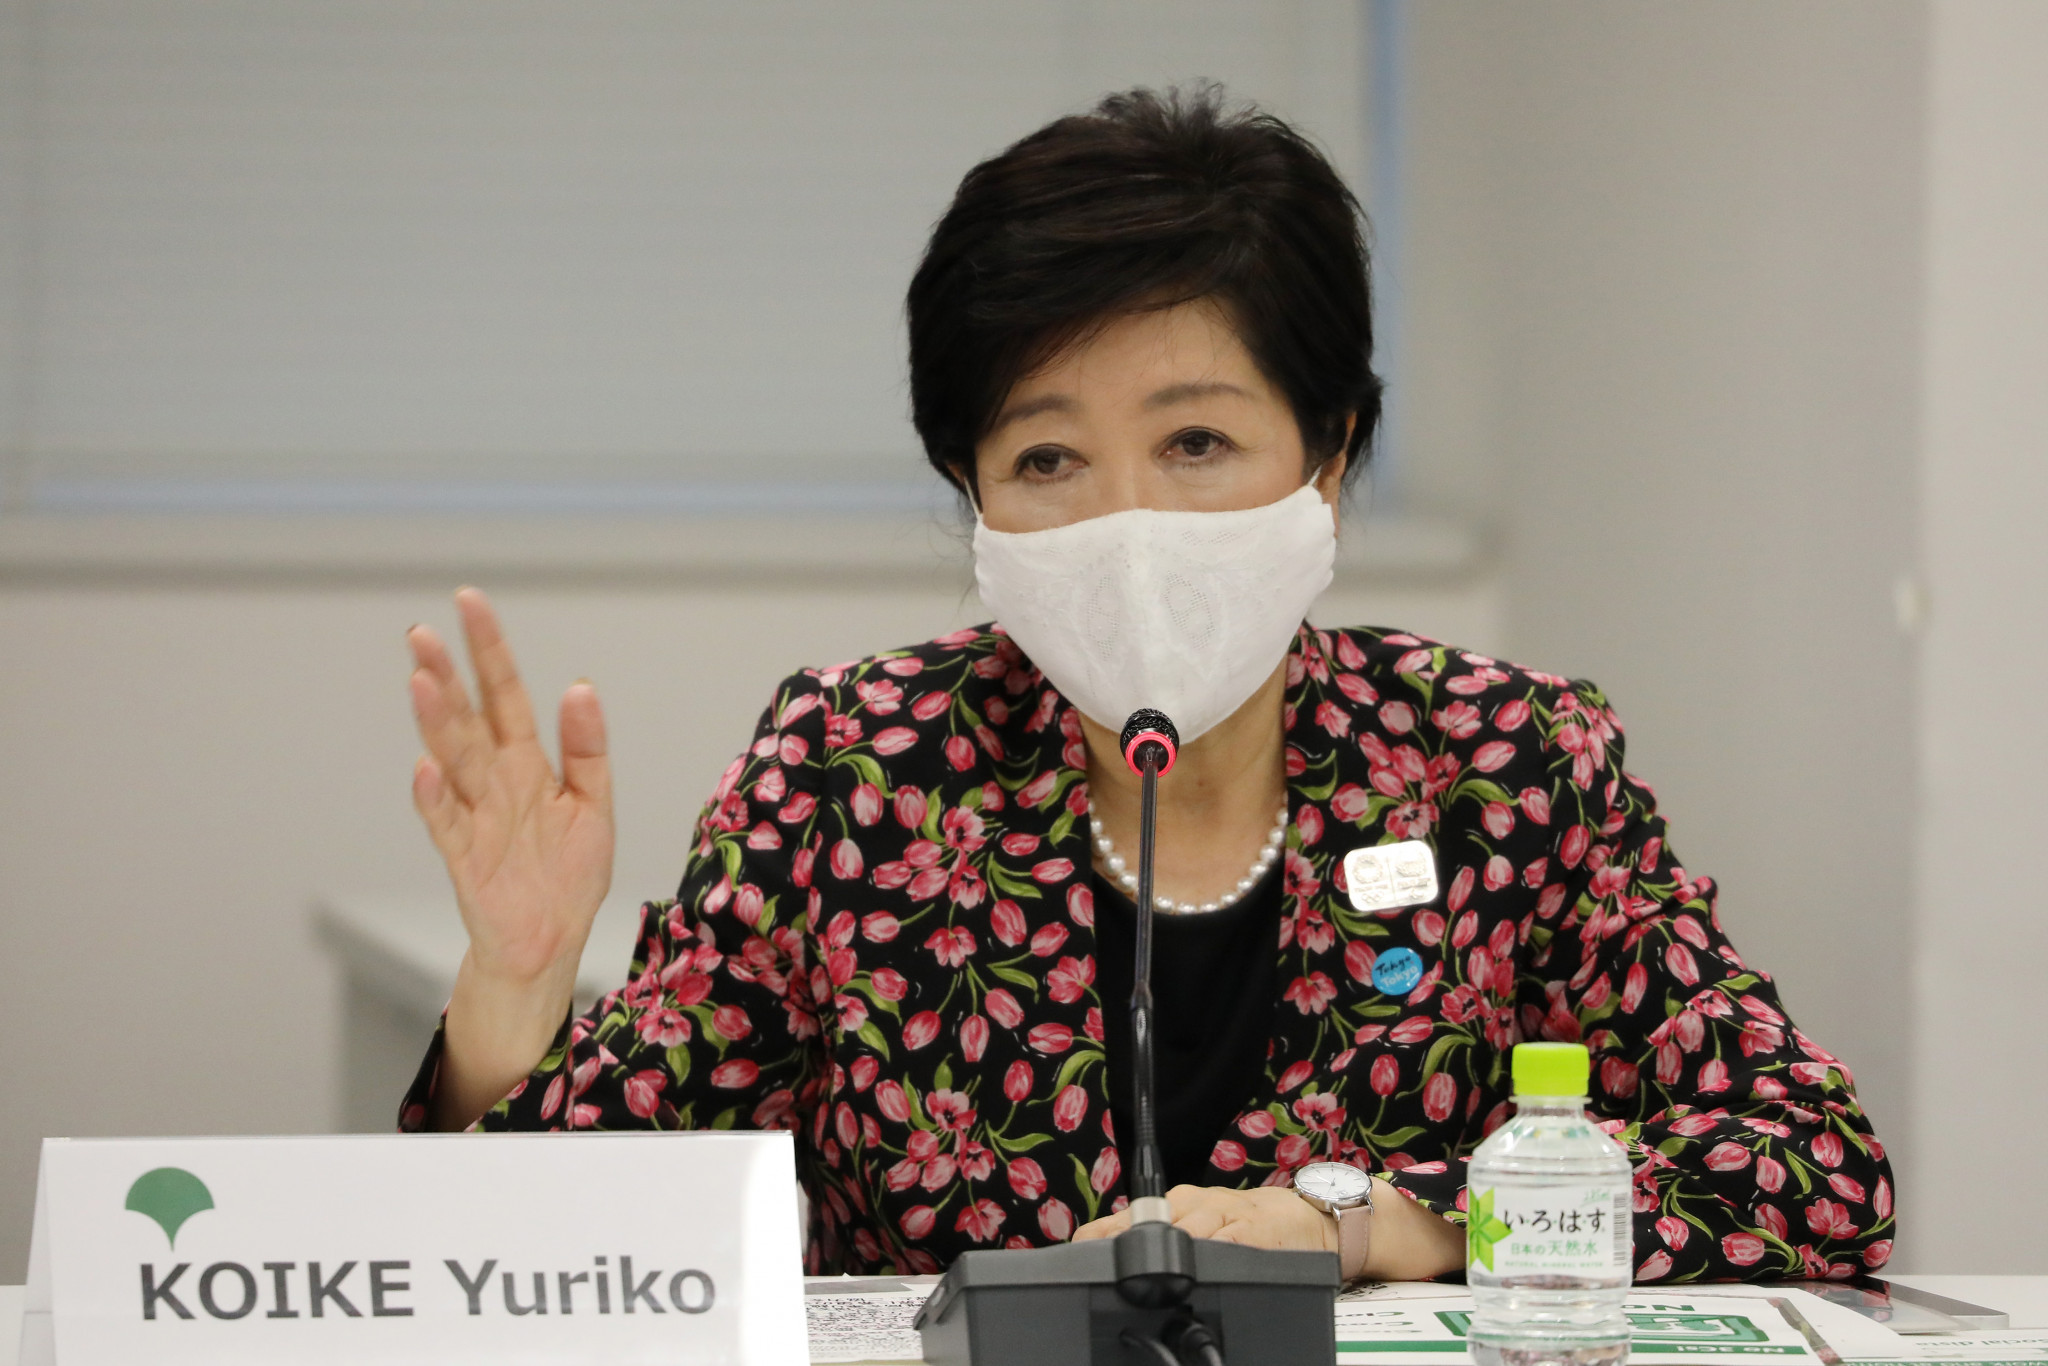 Tokyo Governor Yuriko Koike has revealed she hopes the Olympic and Paralympic Games will have 